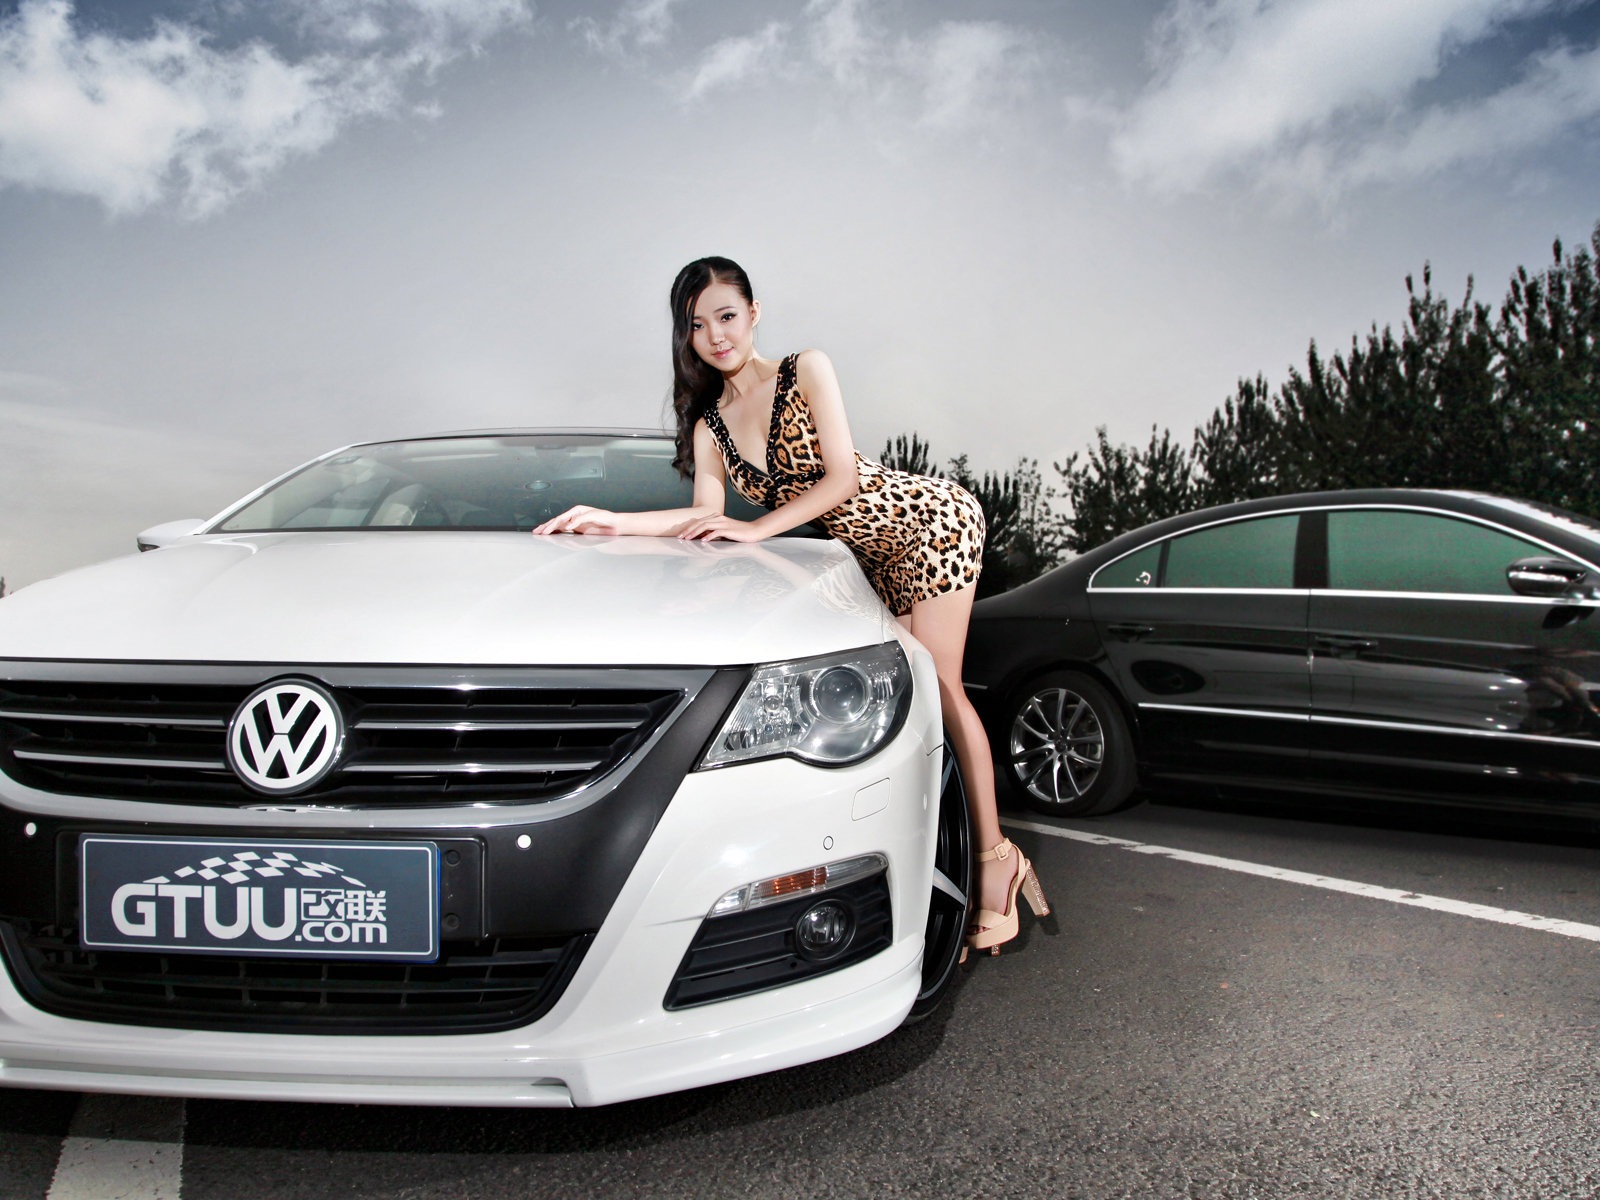 Beautiful leopard dress girl with Volkswagen sports car wallpapers #10 - 1600x1200